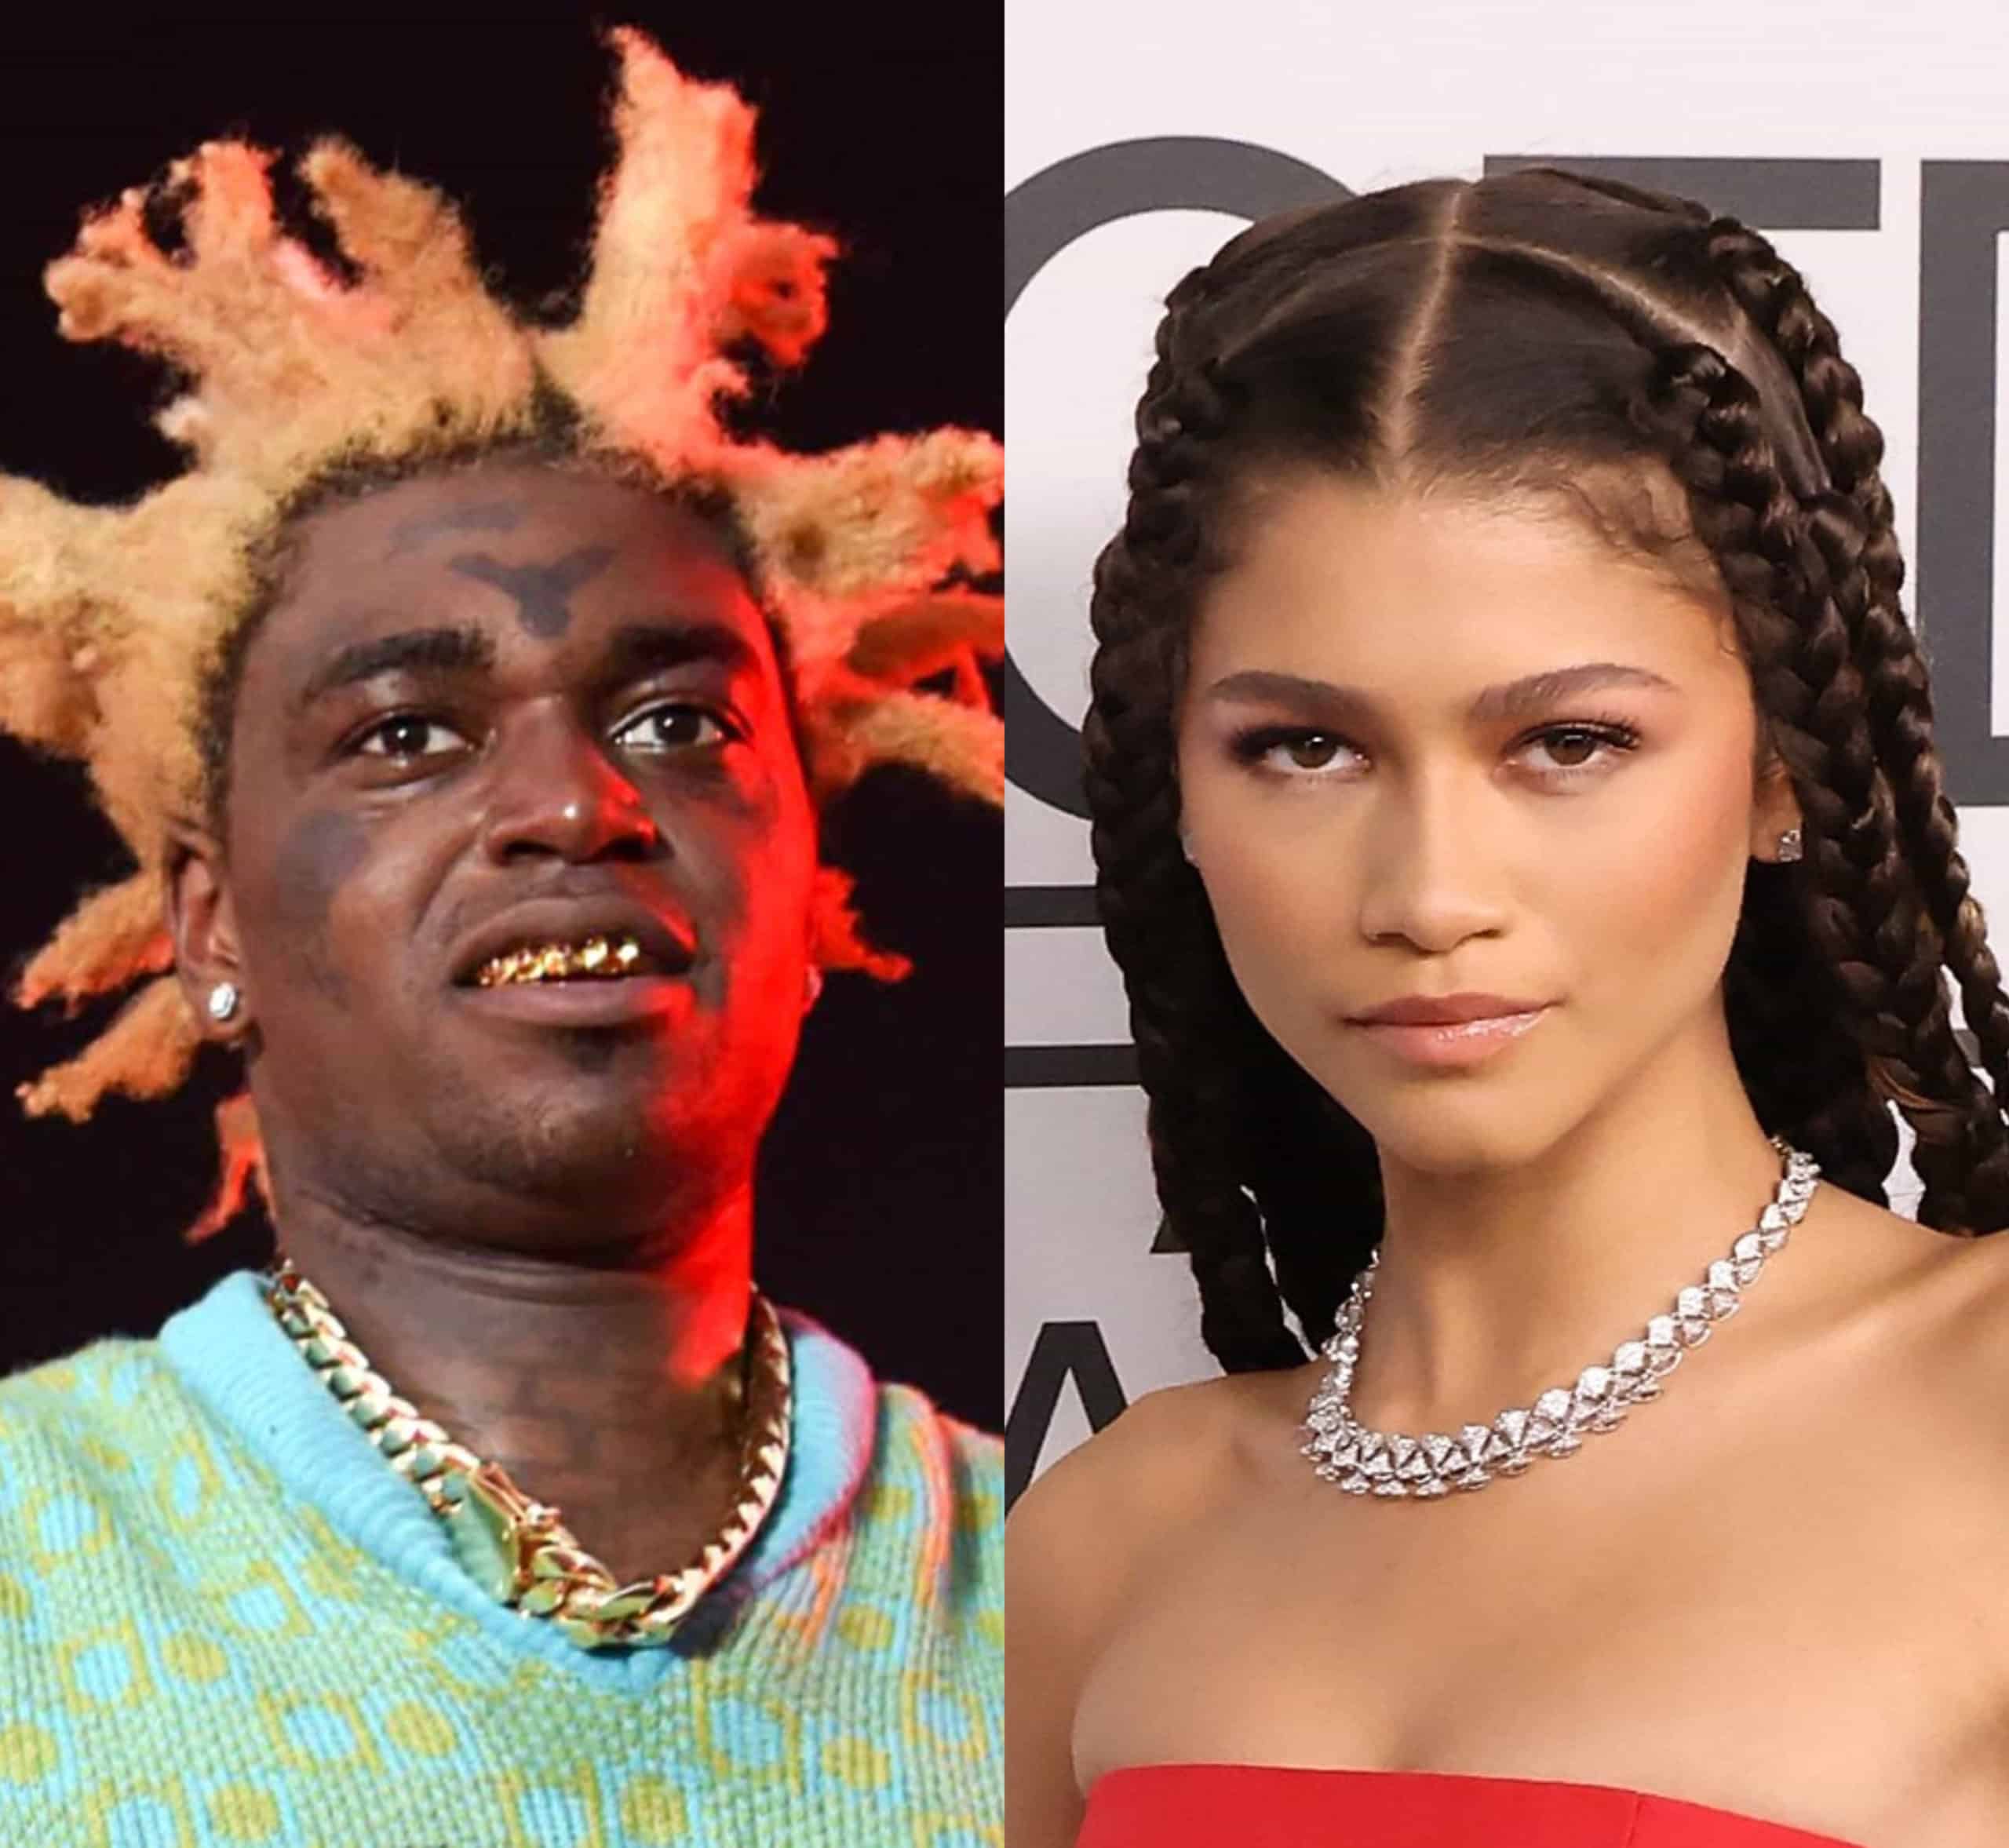 Kodak Black Again Gushes Over Zendaya After Getting Declined By DreamDoll